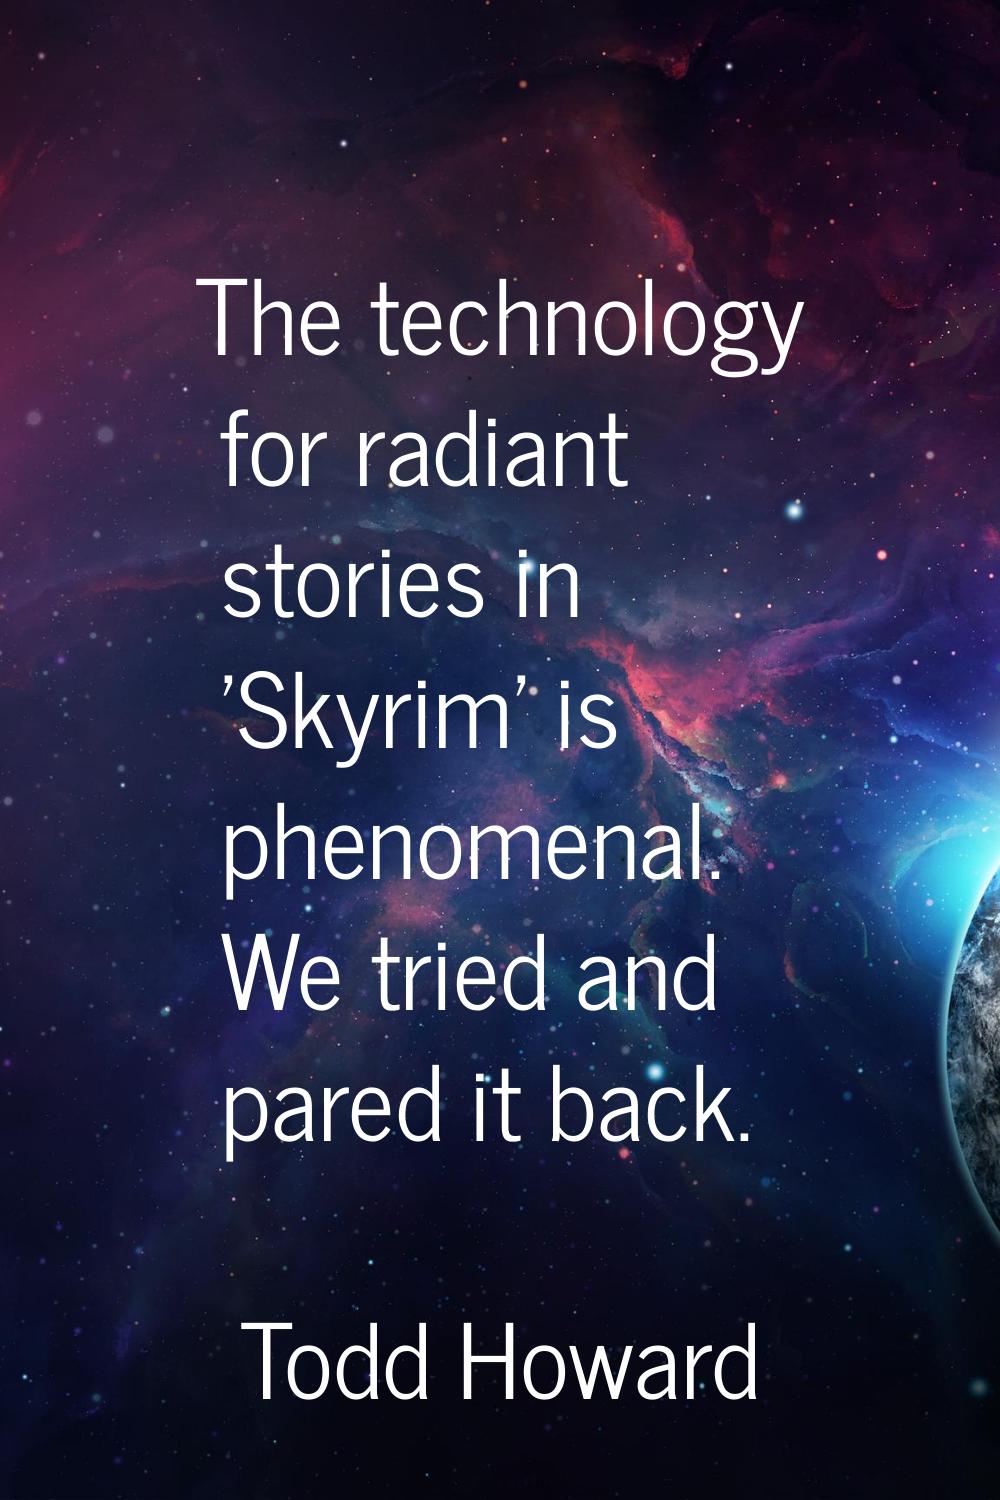 The technology for radiant stories in 'Skyrim' is phenomenal. We tried and pared it back.